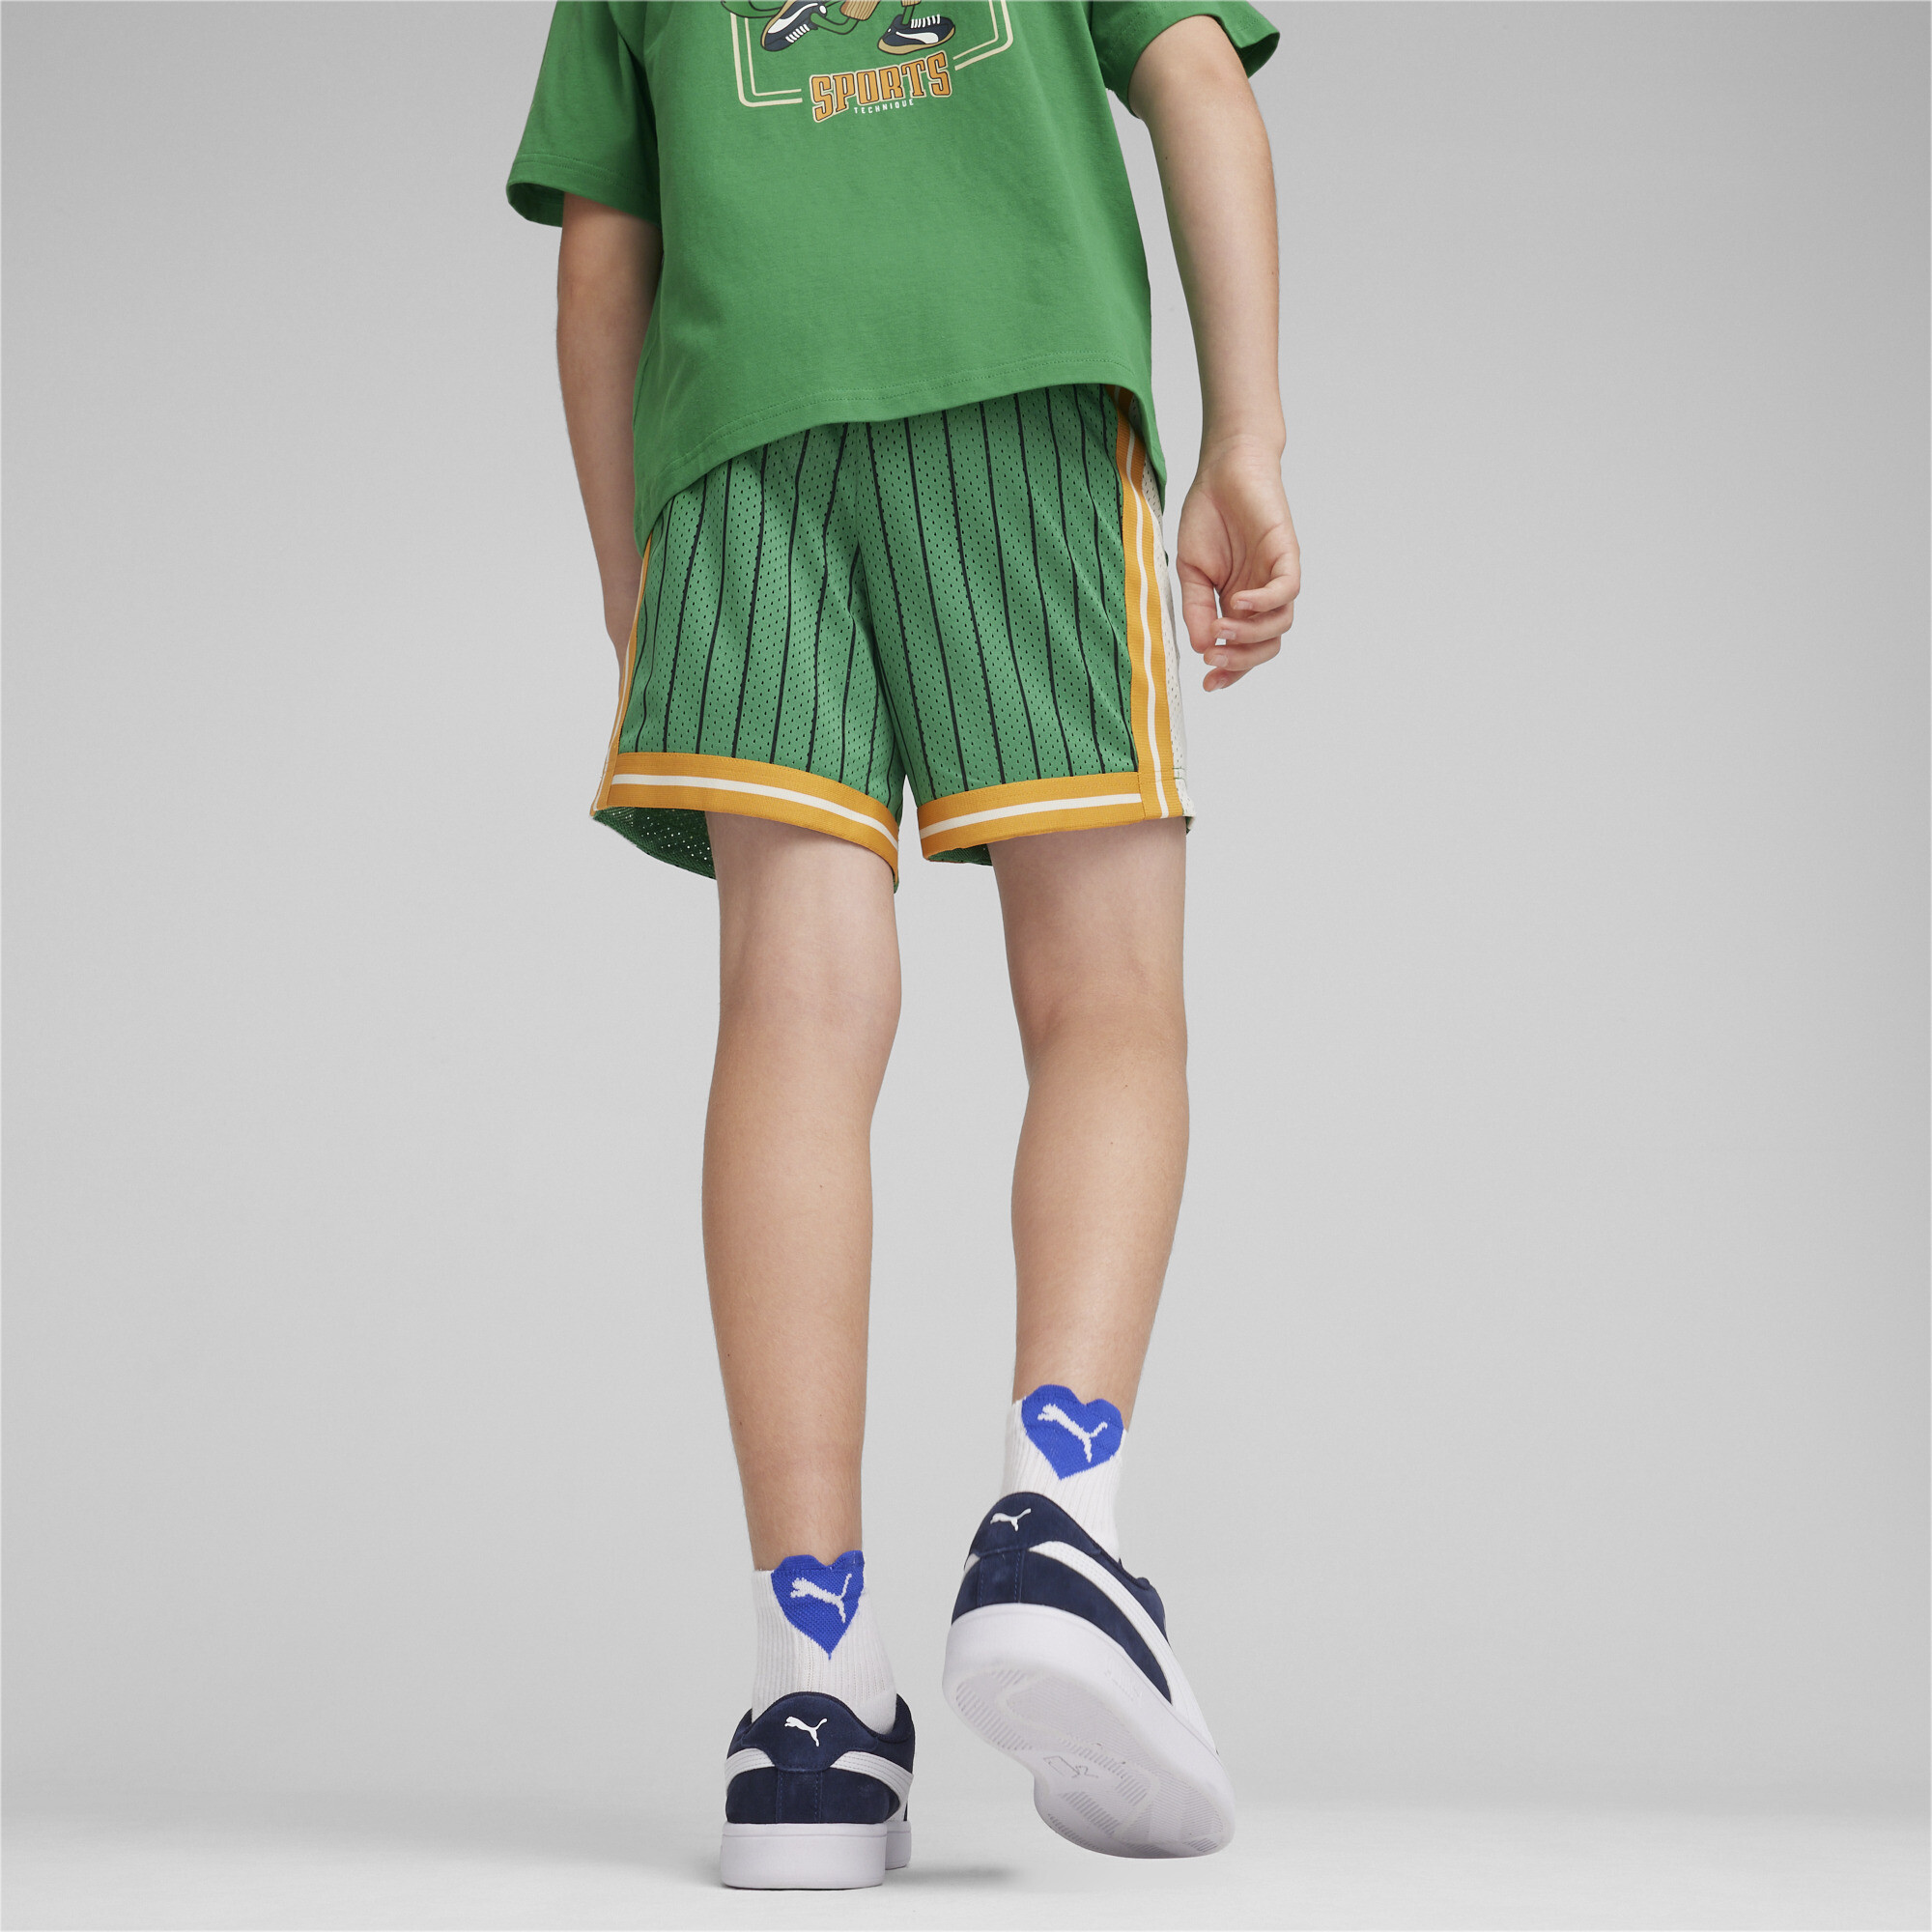 PUMA For The Fanbase Basketball Shorts In Green, Size 9-10 Youth